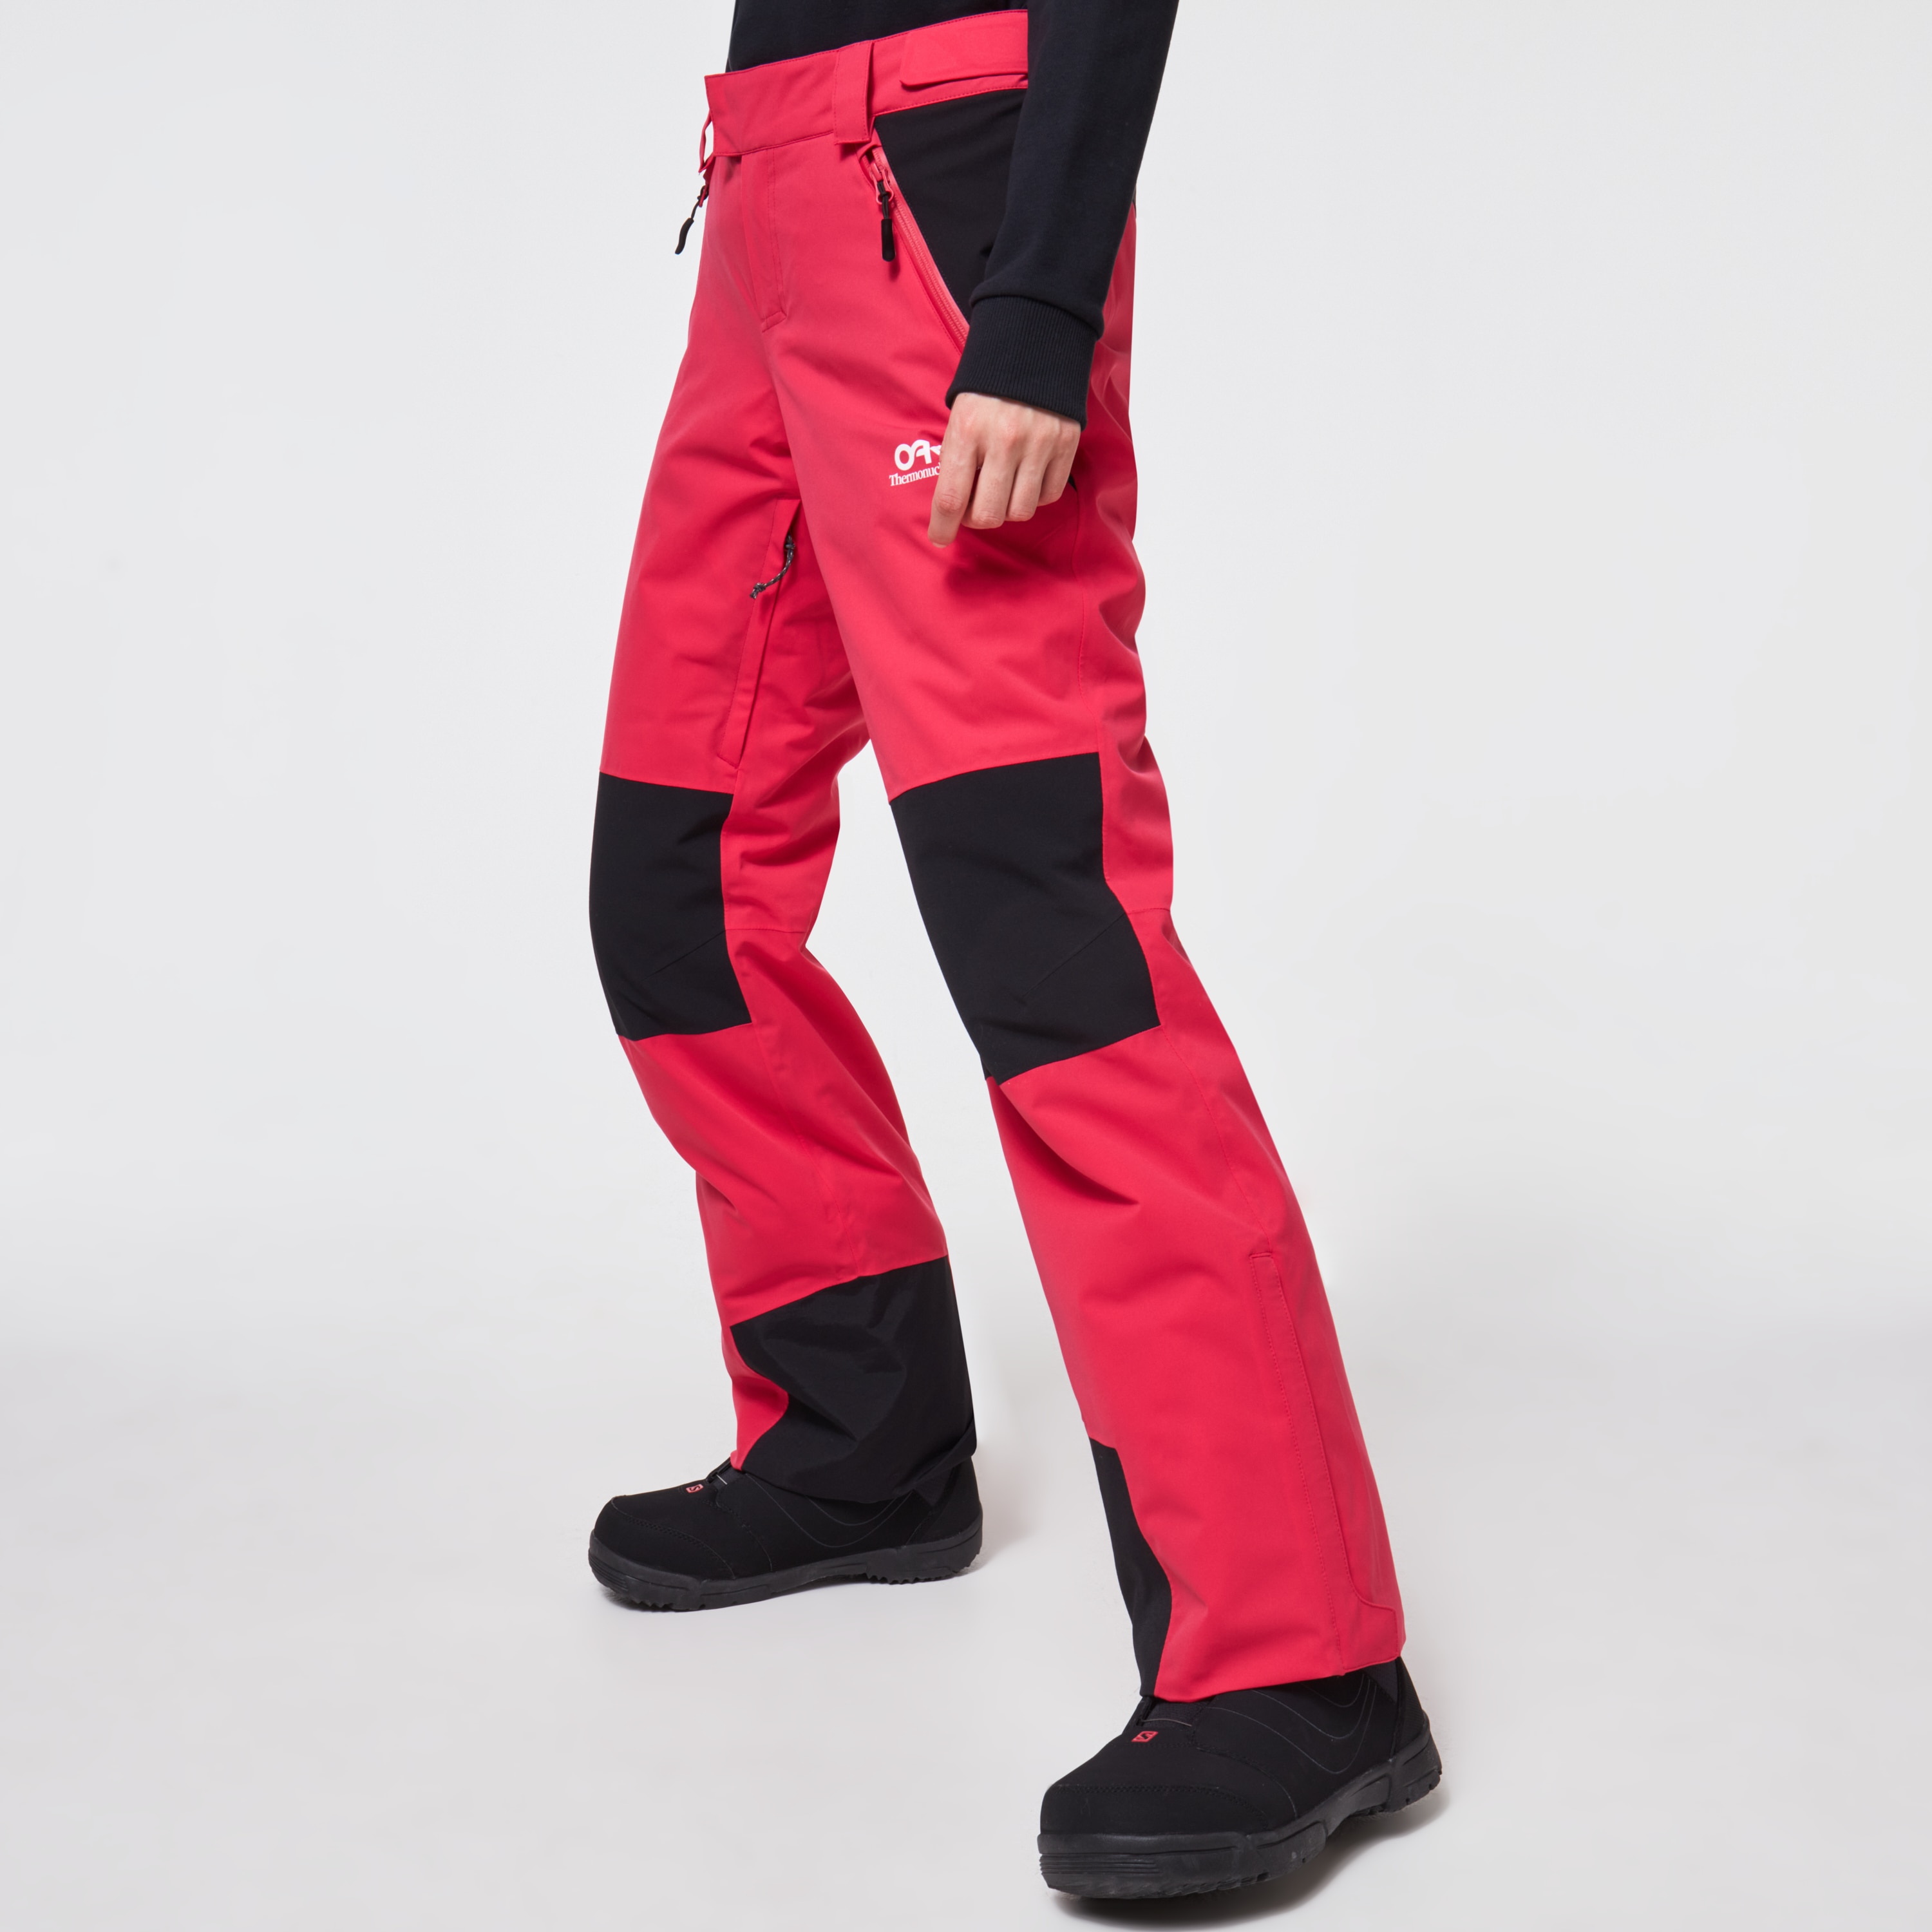 The Bestselling Arctix Snow Pants Are a Musthave